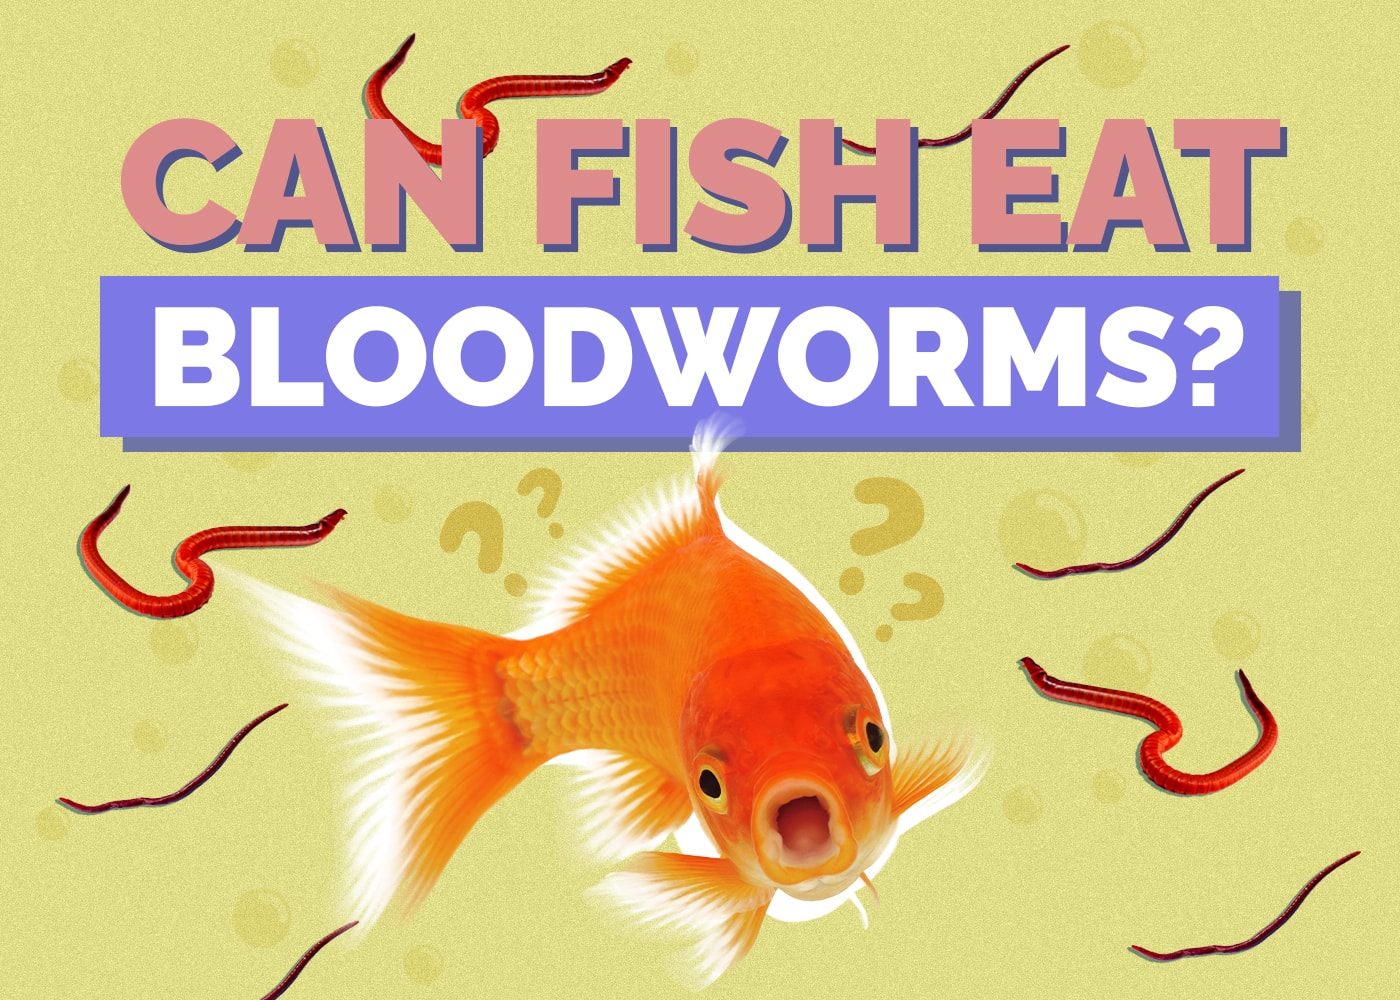 goldfish-bloodworms